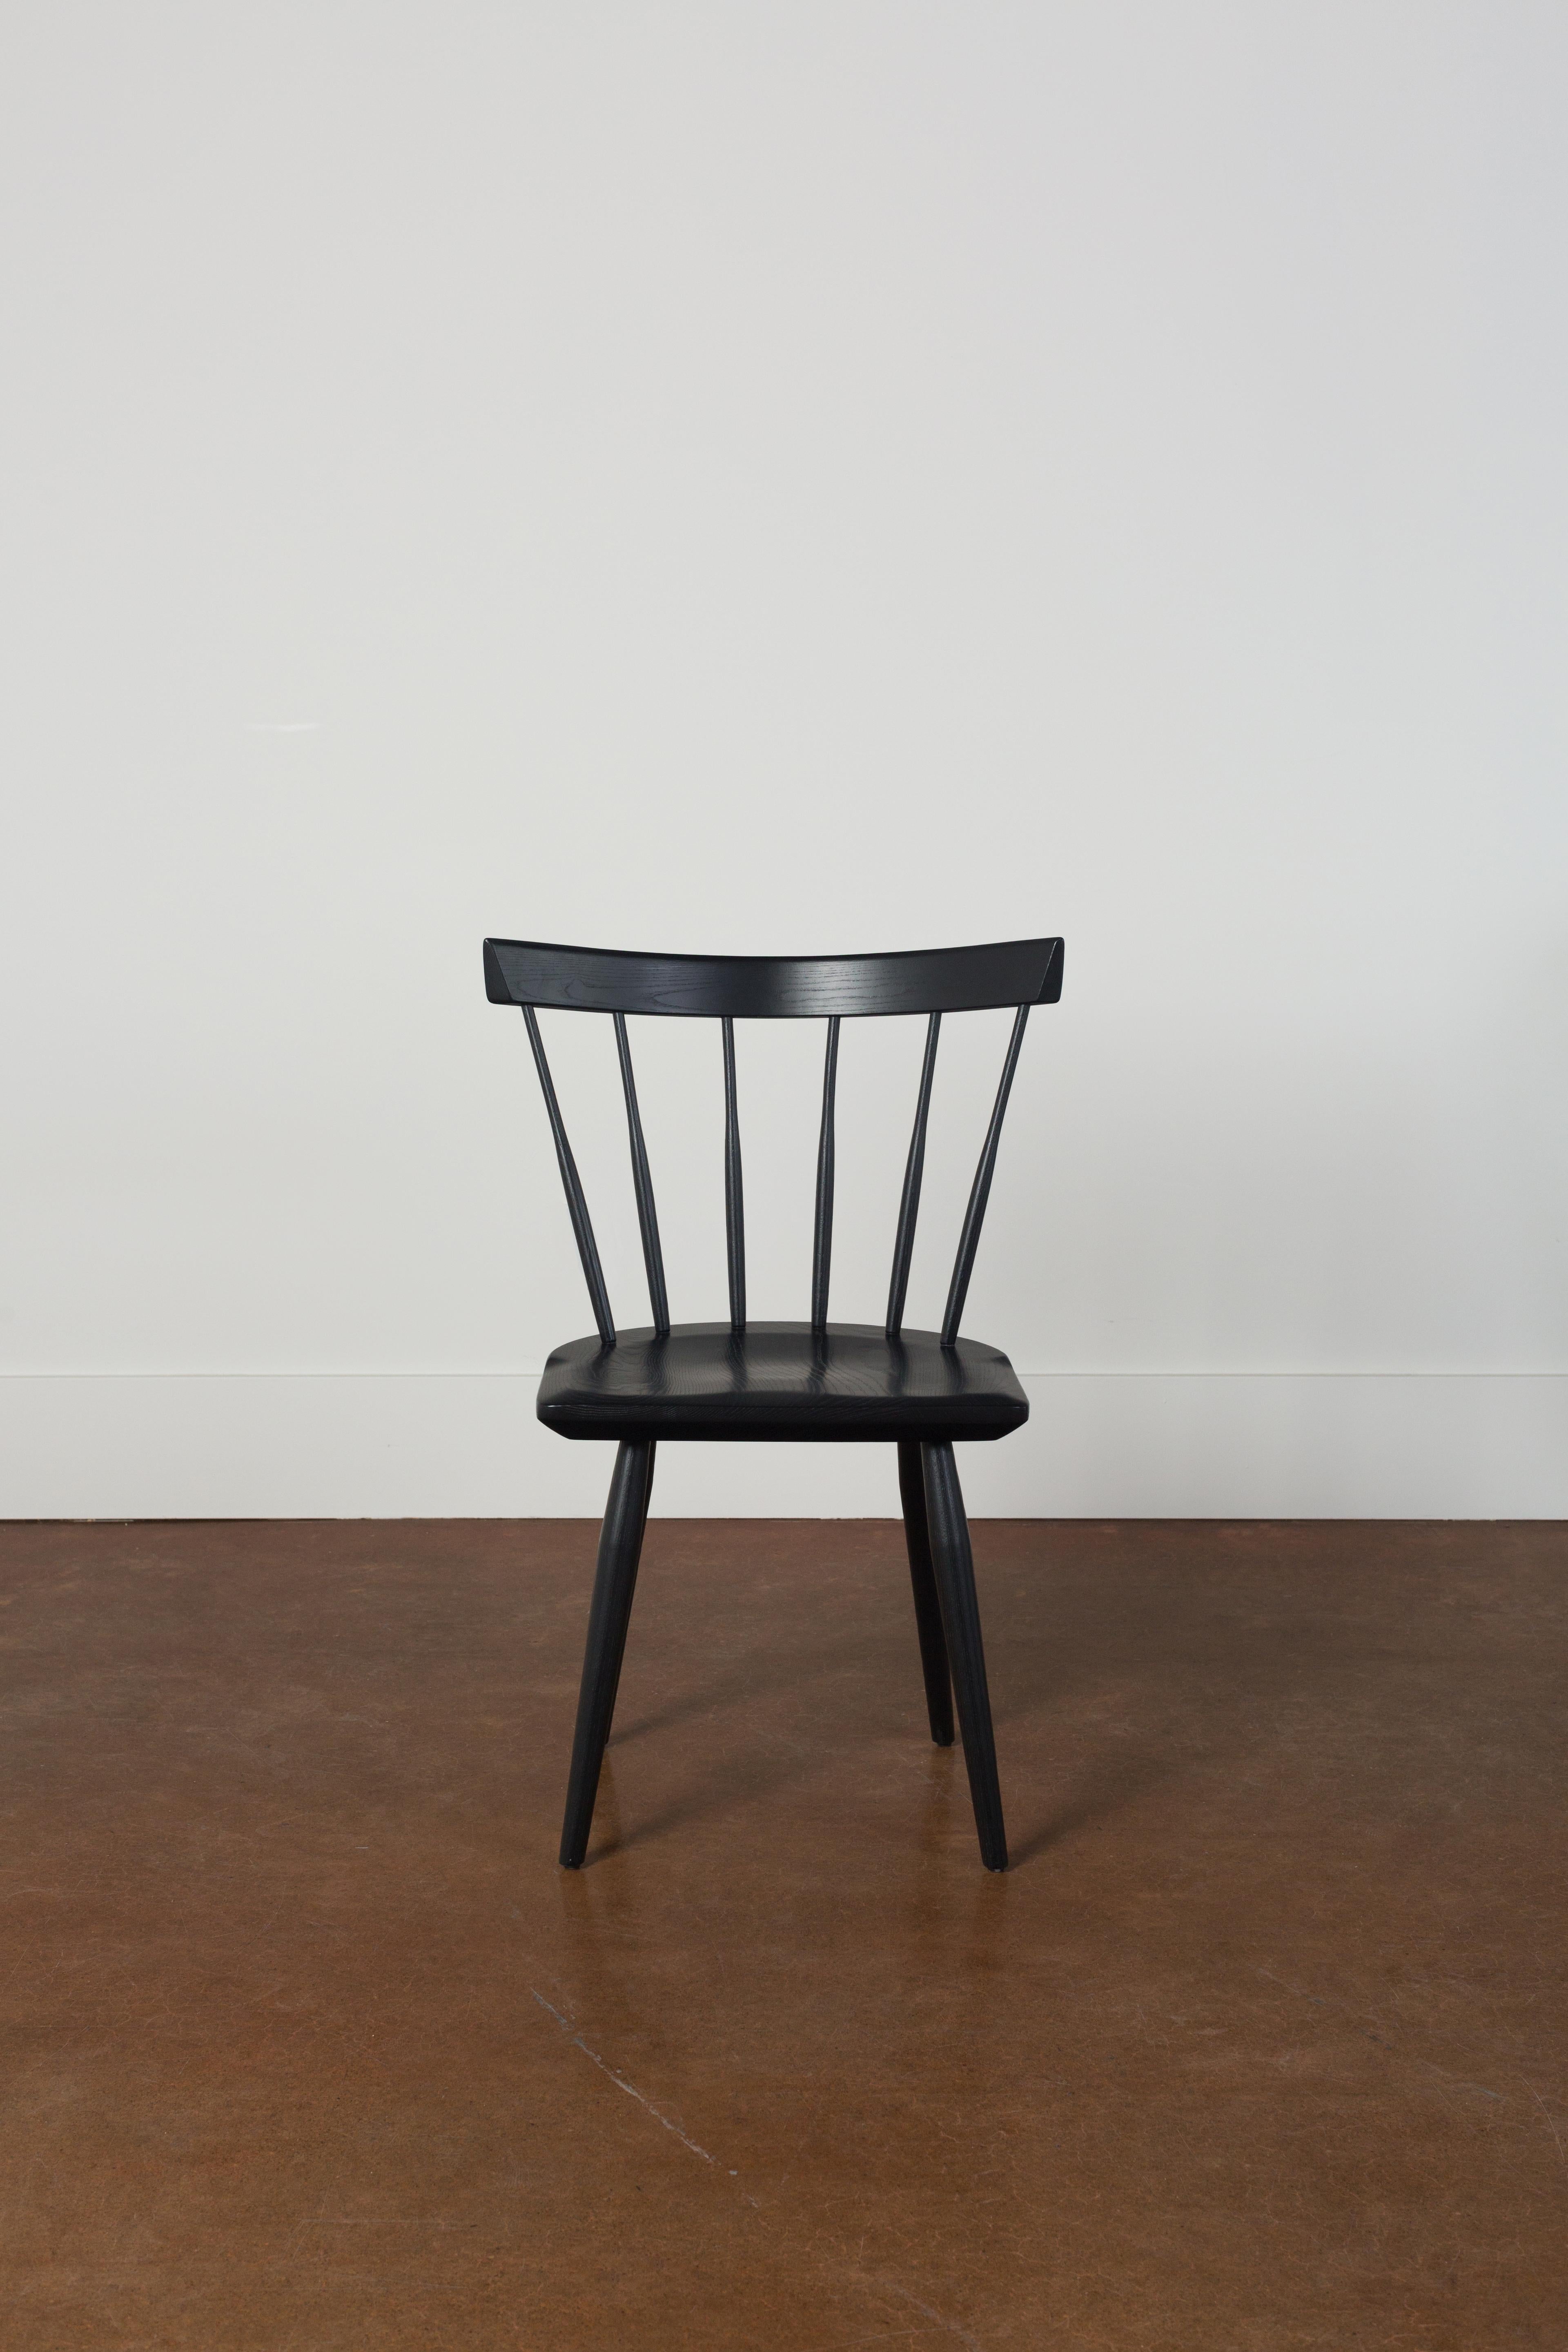 A Windsor chair that’s more city than country.

If you’ve ever visited an Indigo bookstore, you may have already enjoyed the comfort of our iconic modern low-back Windsor chairs. Now, you can take that comfort and craftsmanship home.

This side